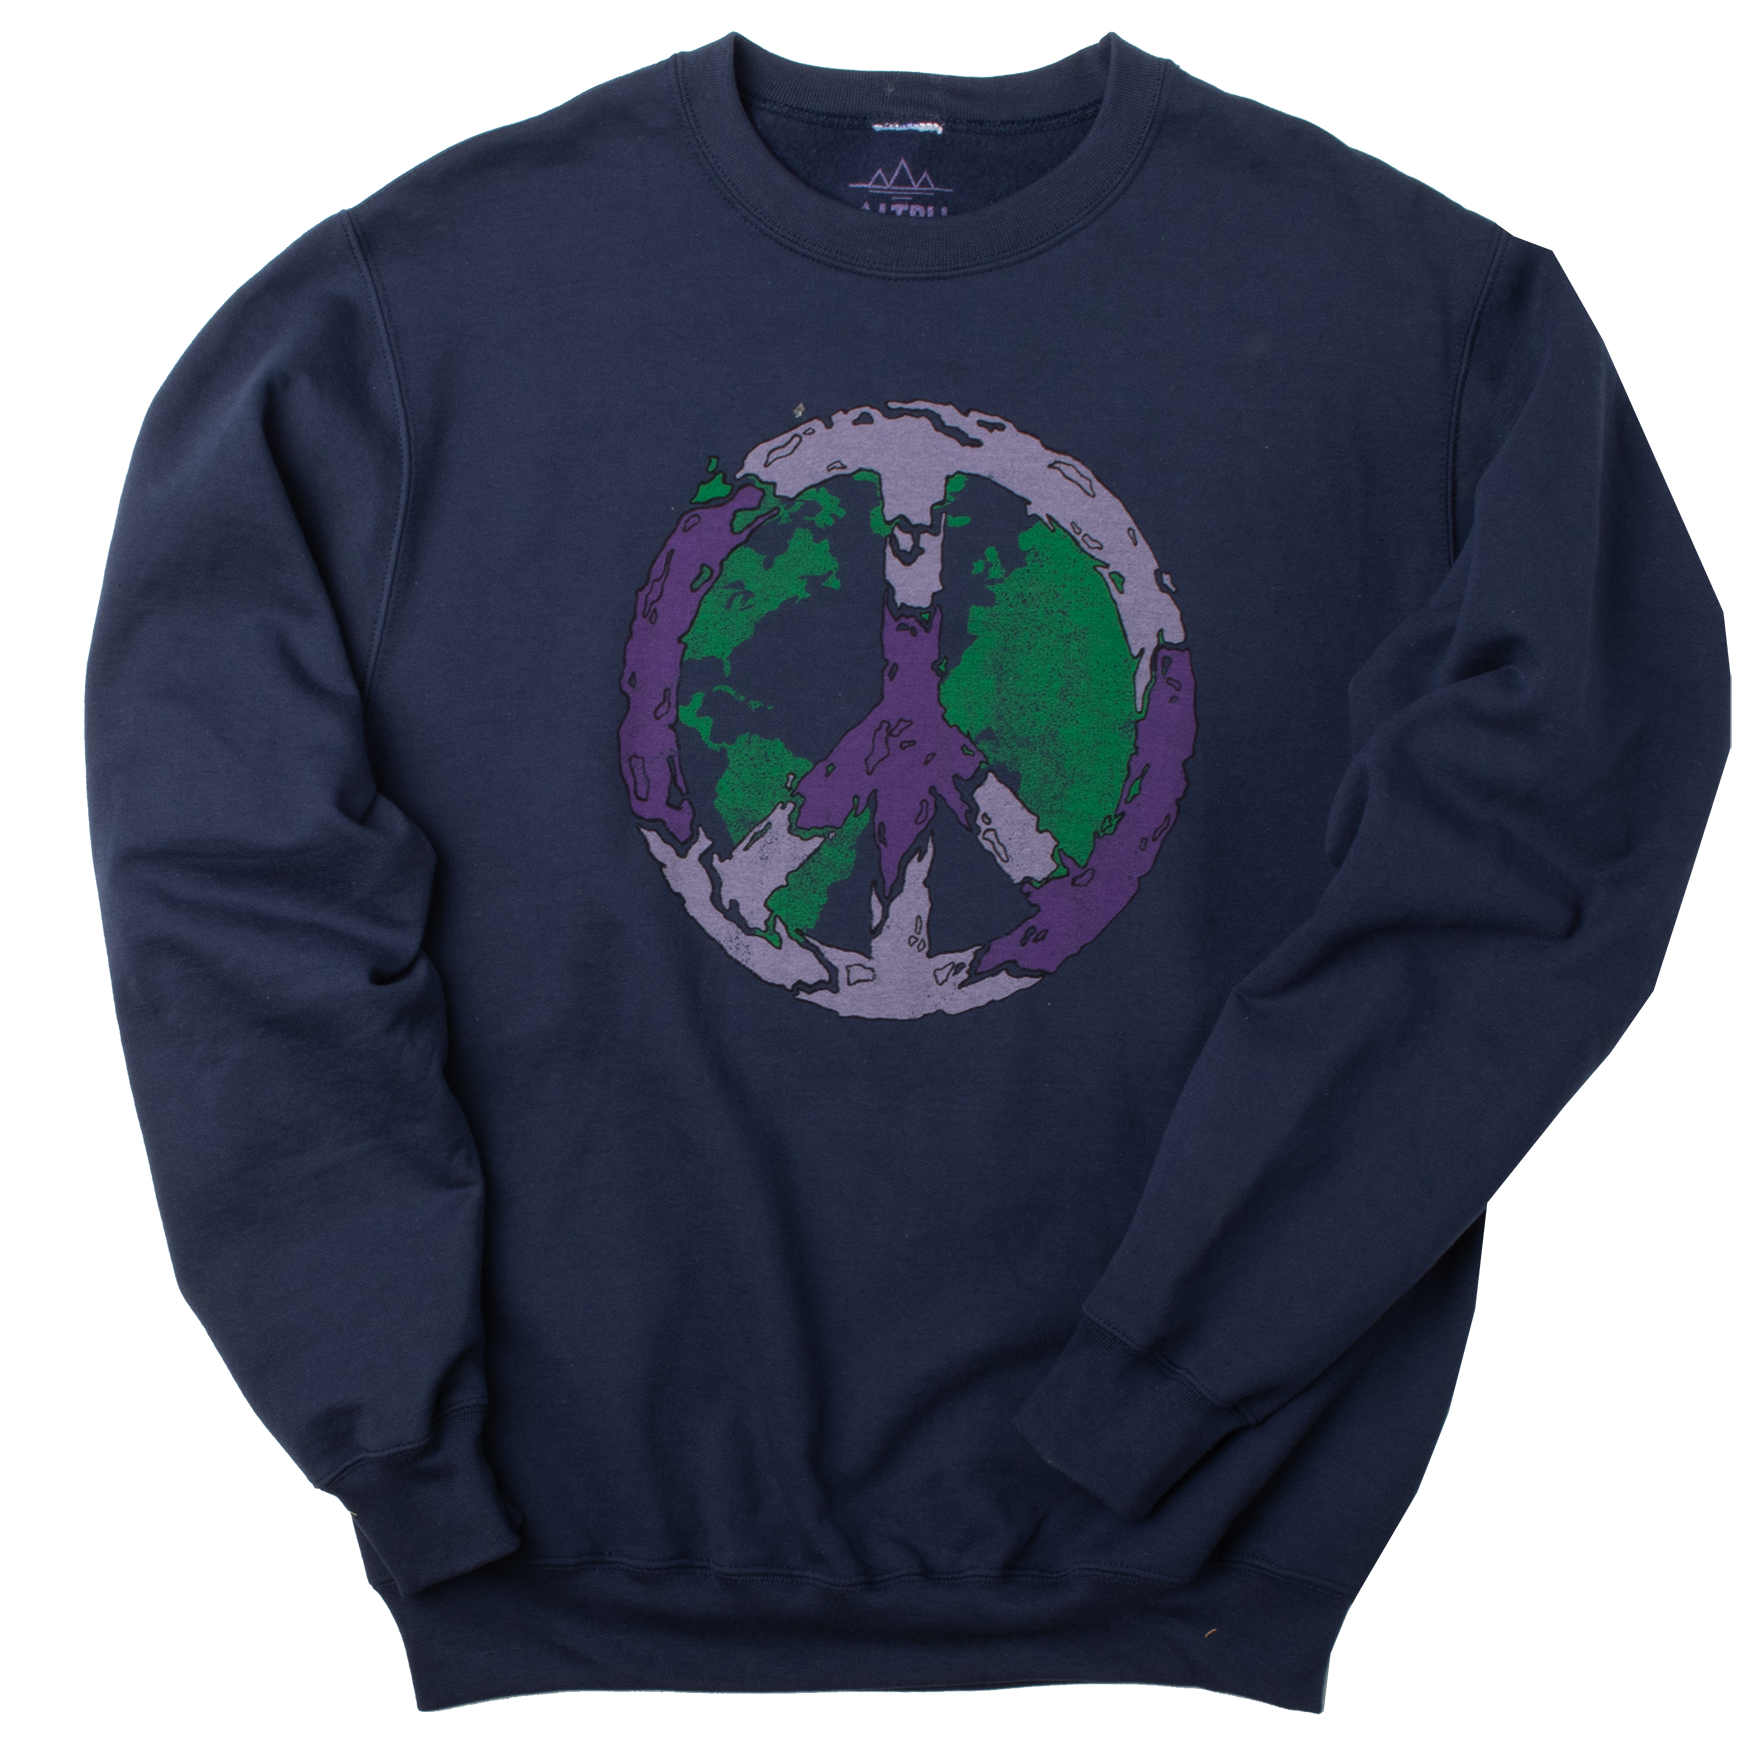 Full front photo of sweatshirt. Peace vibes fleece sweatshirt of Earth covered with the peace sign. Screen printed graphic on front of comfortable navy-blue super soft fleece.